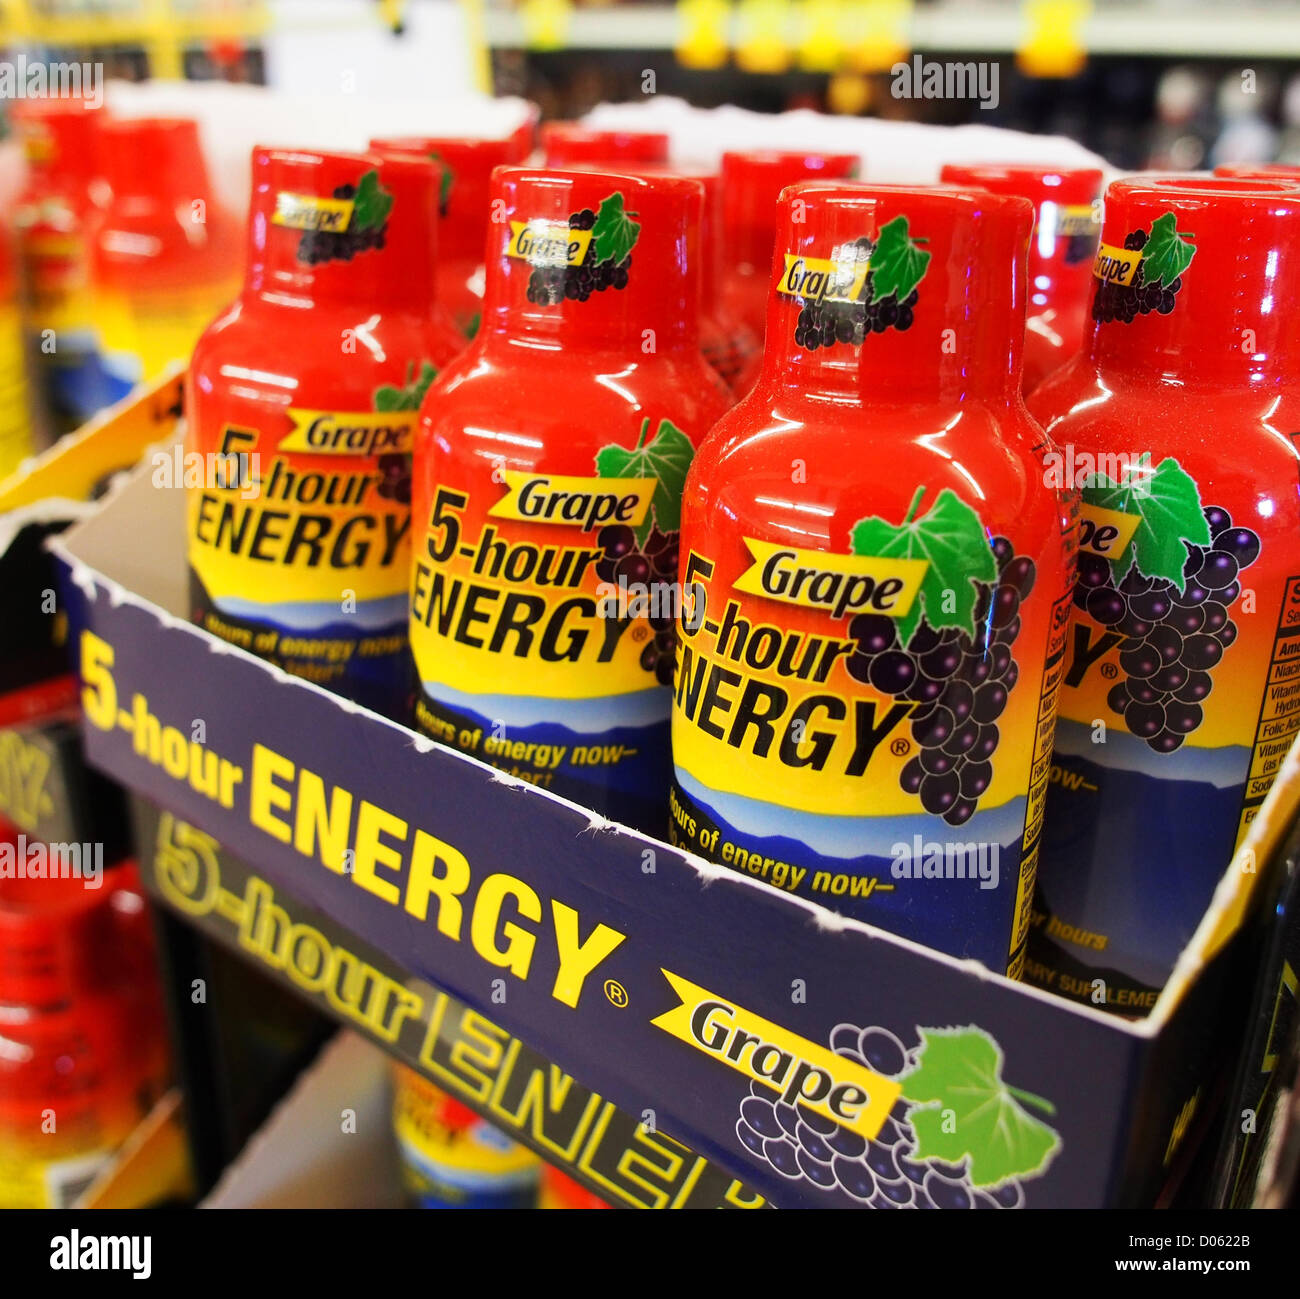 Jan. 1, 2012 - Orange County, California, USA - 5-Hour Energy drinks come in several flavors including orange, cherry and grape as well as a berry flavor in an extra strength mix.News outlets, including ABC's Nightline, have reported that 13 deaths along with over 30 hospitalizations over the last 4 years in the United States can be attributed to the use of highly caffeinated energy drinks like 5-Hour Energy and Monster.  The drinks carry no age restriction and can be purchased by children.  In the case of 5-Hour Energy,  the drink has the caffeine equivalent of two regular cups of coffee in l Stock Photo